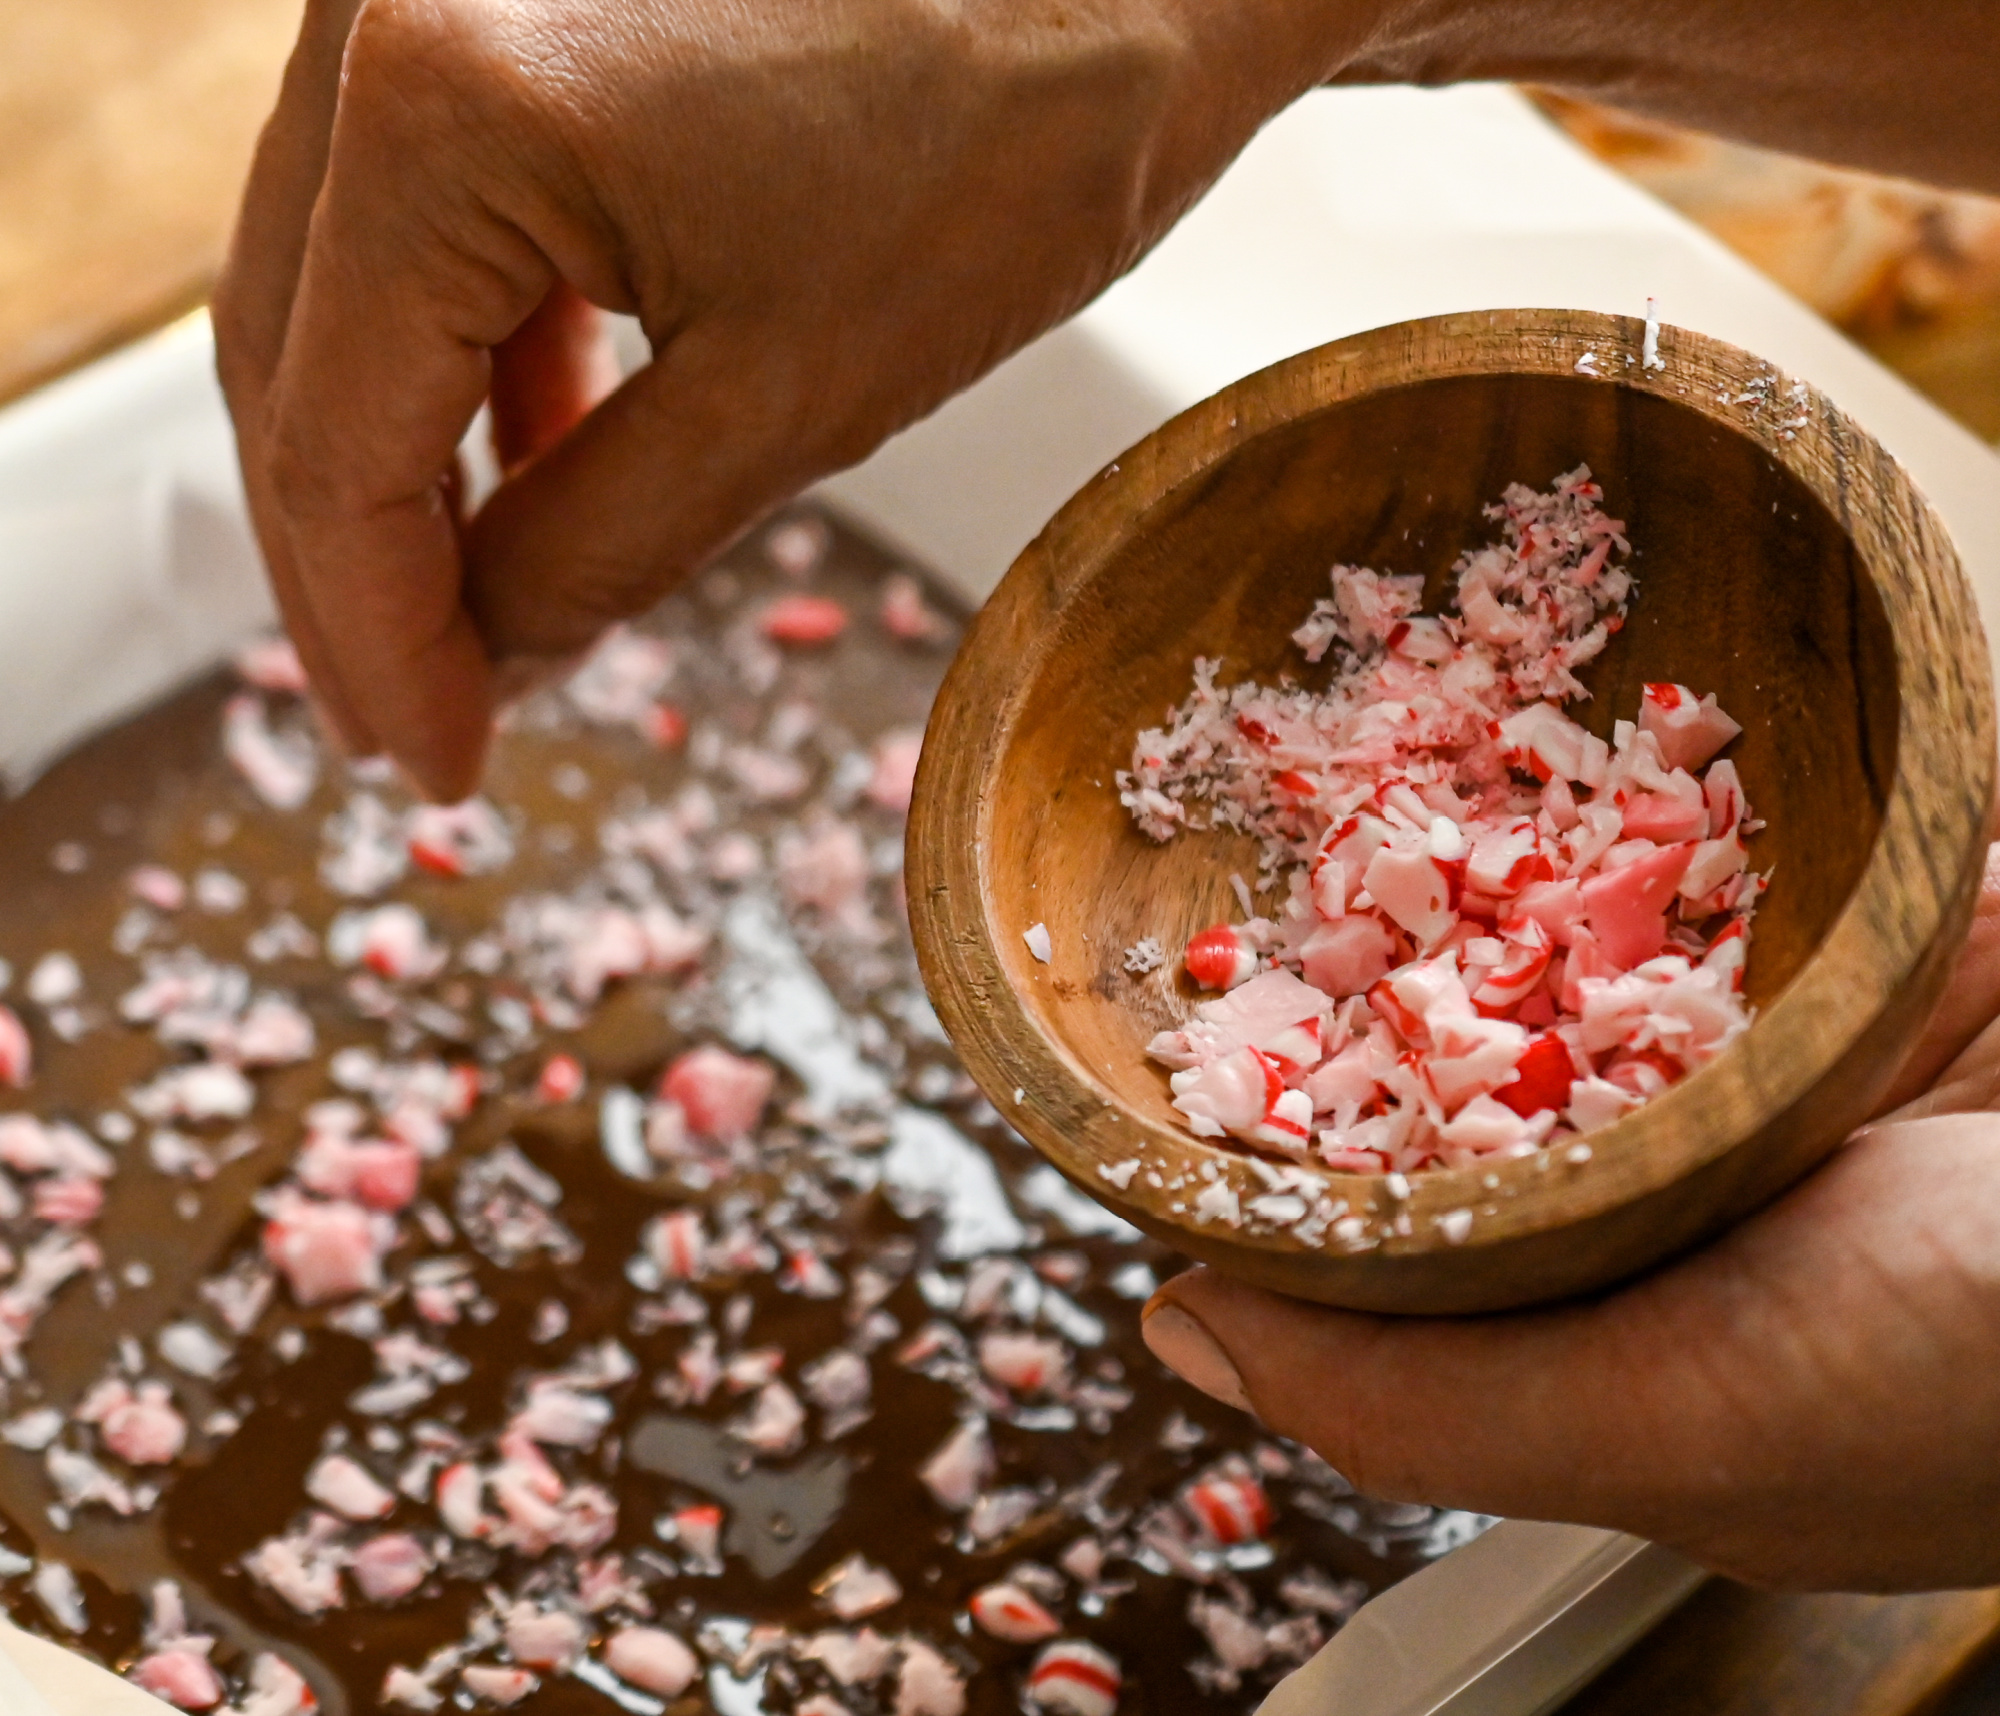 Crushed sugar free peppermint candies being sprinkled on keto chocolate bark